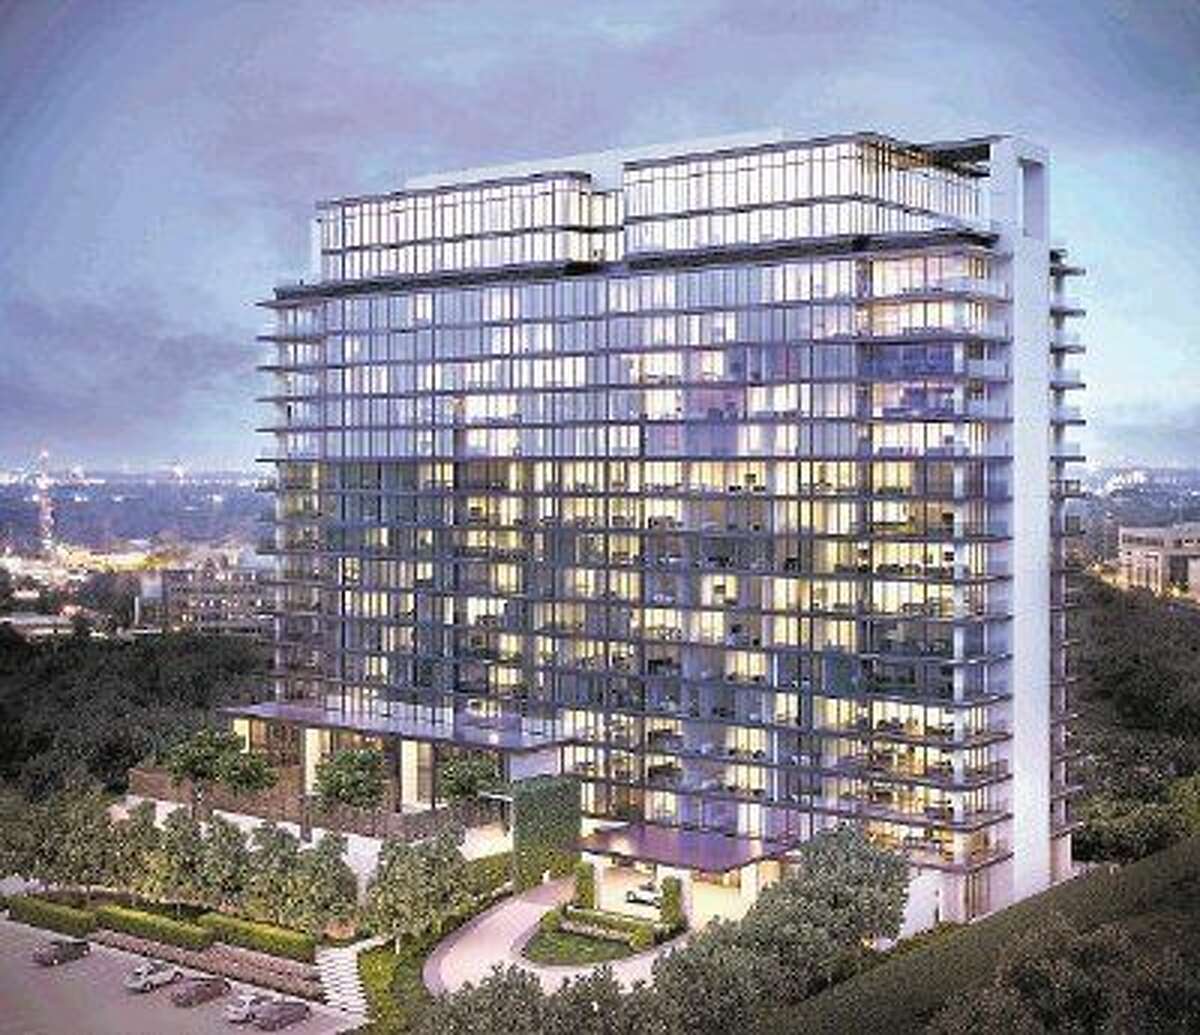 The River Oaks condominiums planned for completion in 2017, is a 250,000 square-foot luxury condominium, located at 3433 Westheimer, between Edloe and Buffalo Speedway, in the heart of River Oaks.